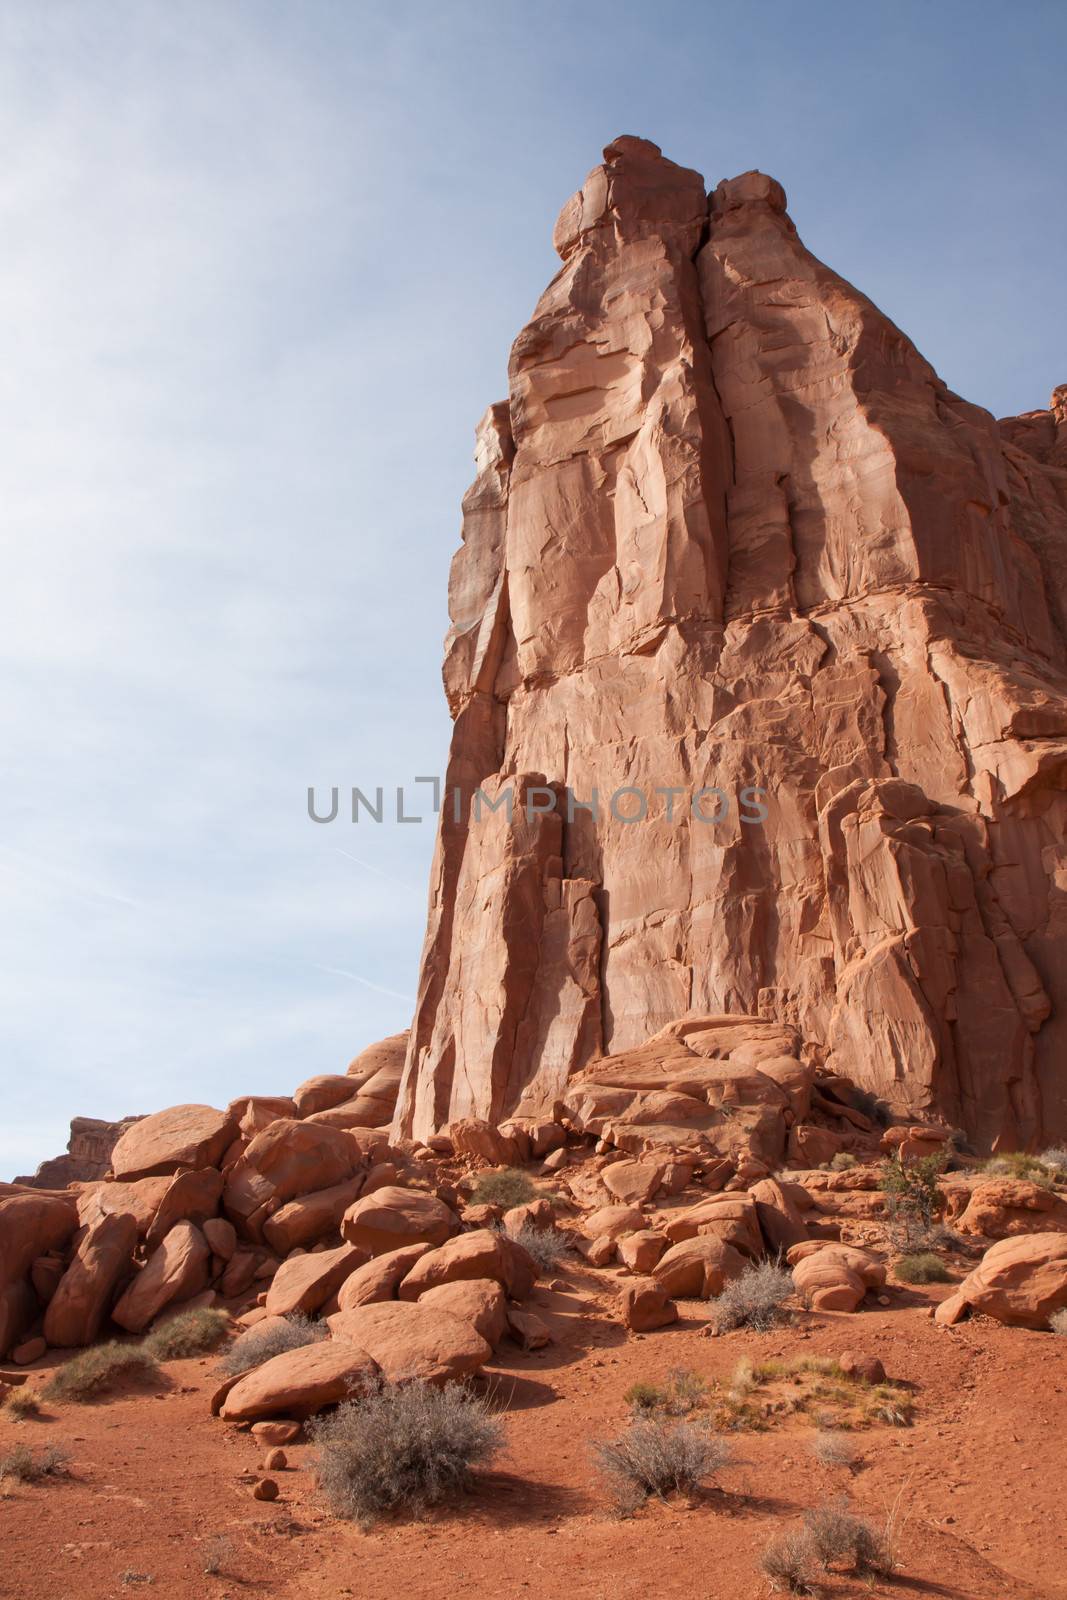 Arches National Park, Utah. This is a massive formation that exudes strength and grandeur.